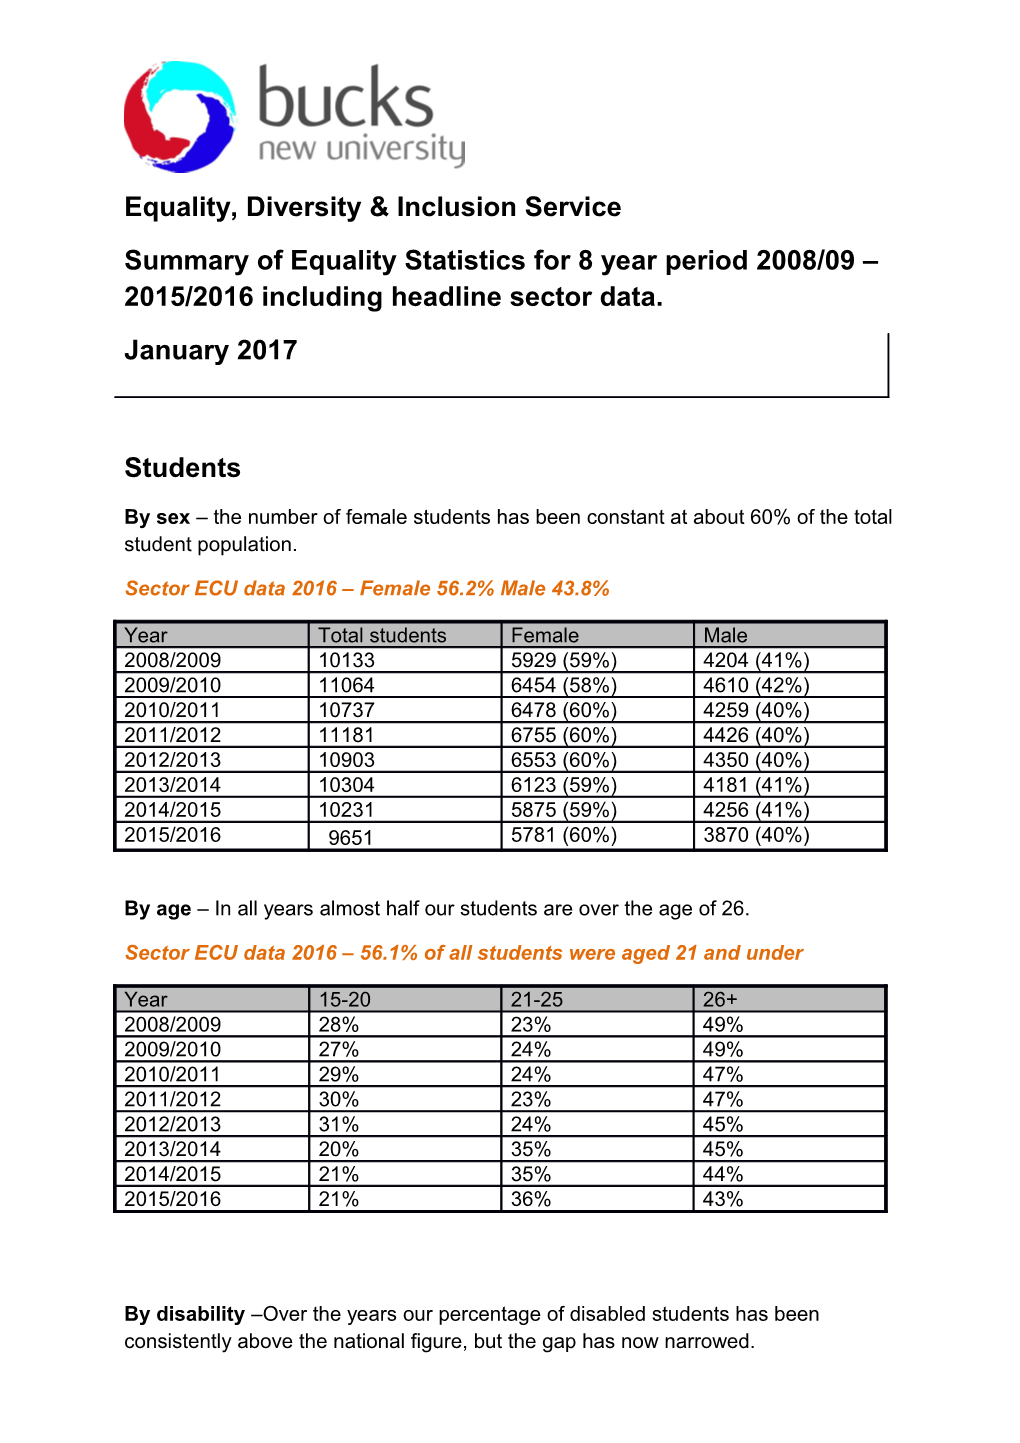 Summary of Equality Statistics for 8 Year Period 2008/09 2015/2016 Including Headline